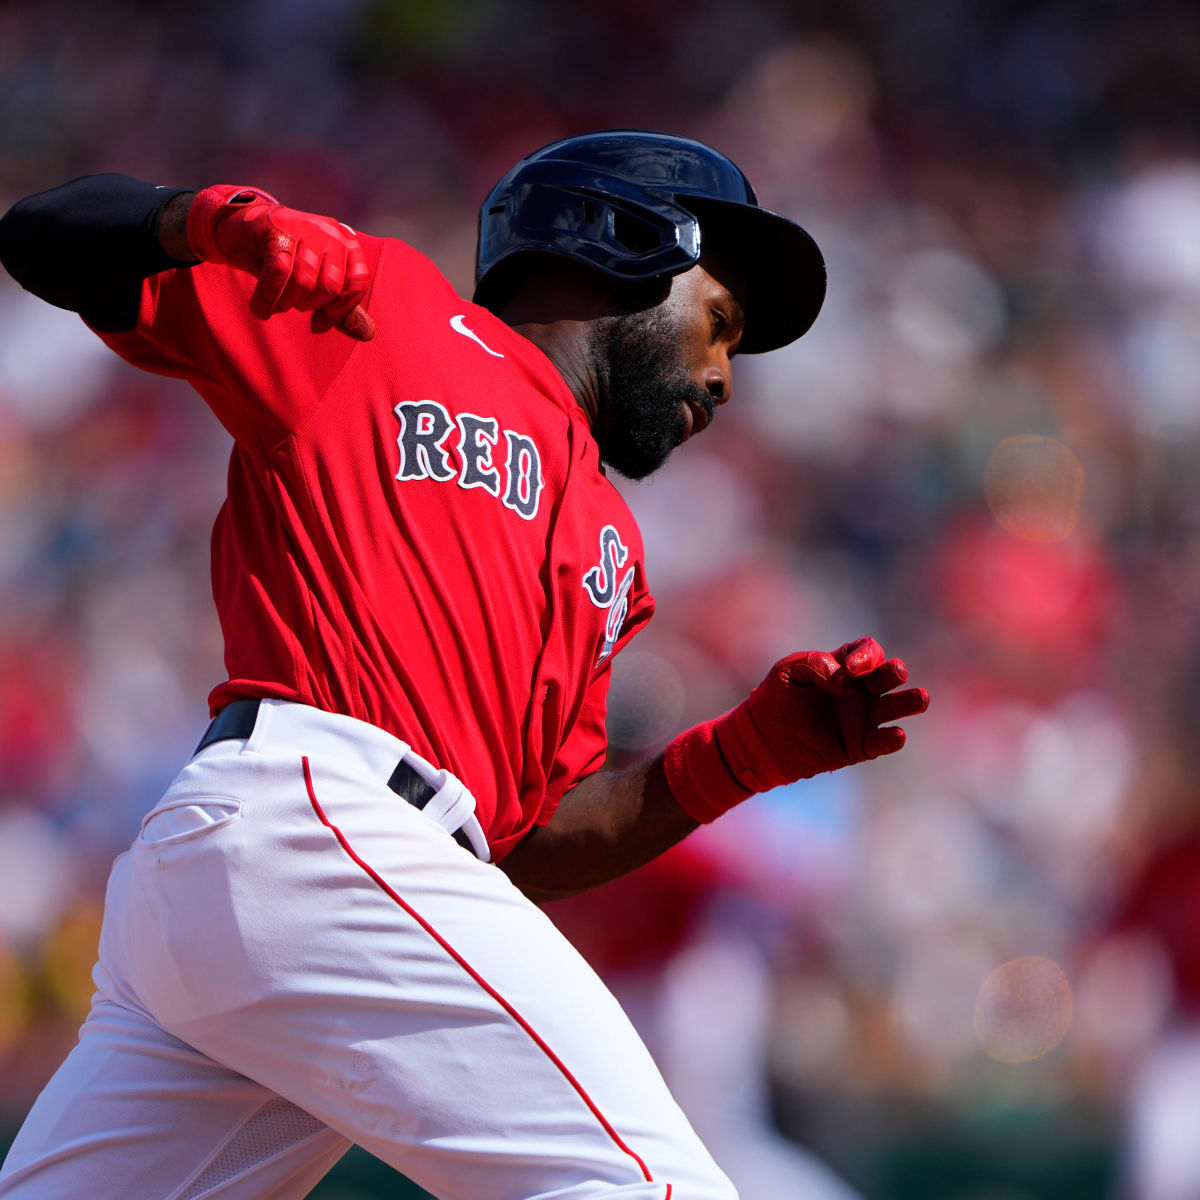 Boston Red Sox - The #RedSox today acquired OF Jackie Bradley Jr